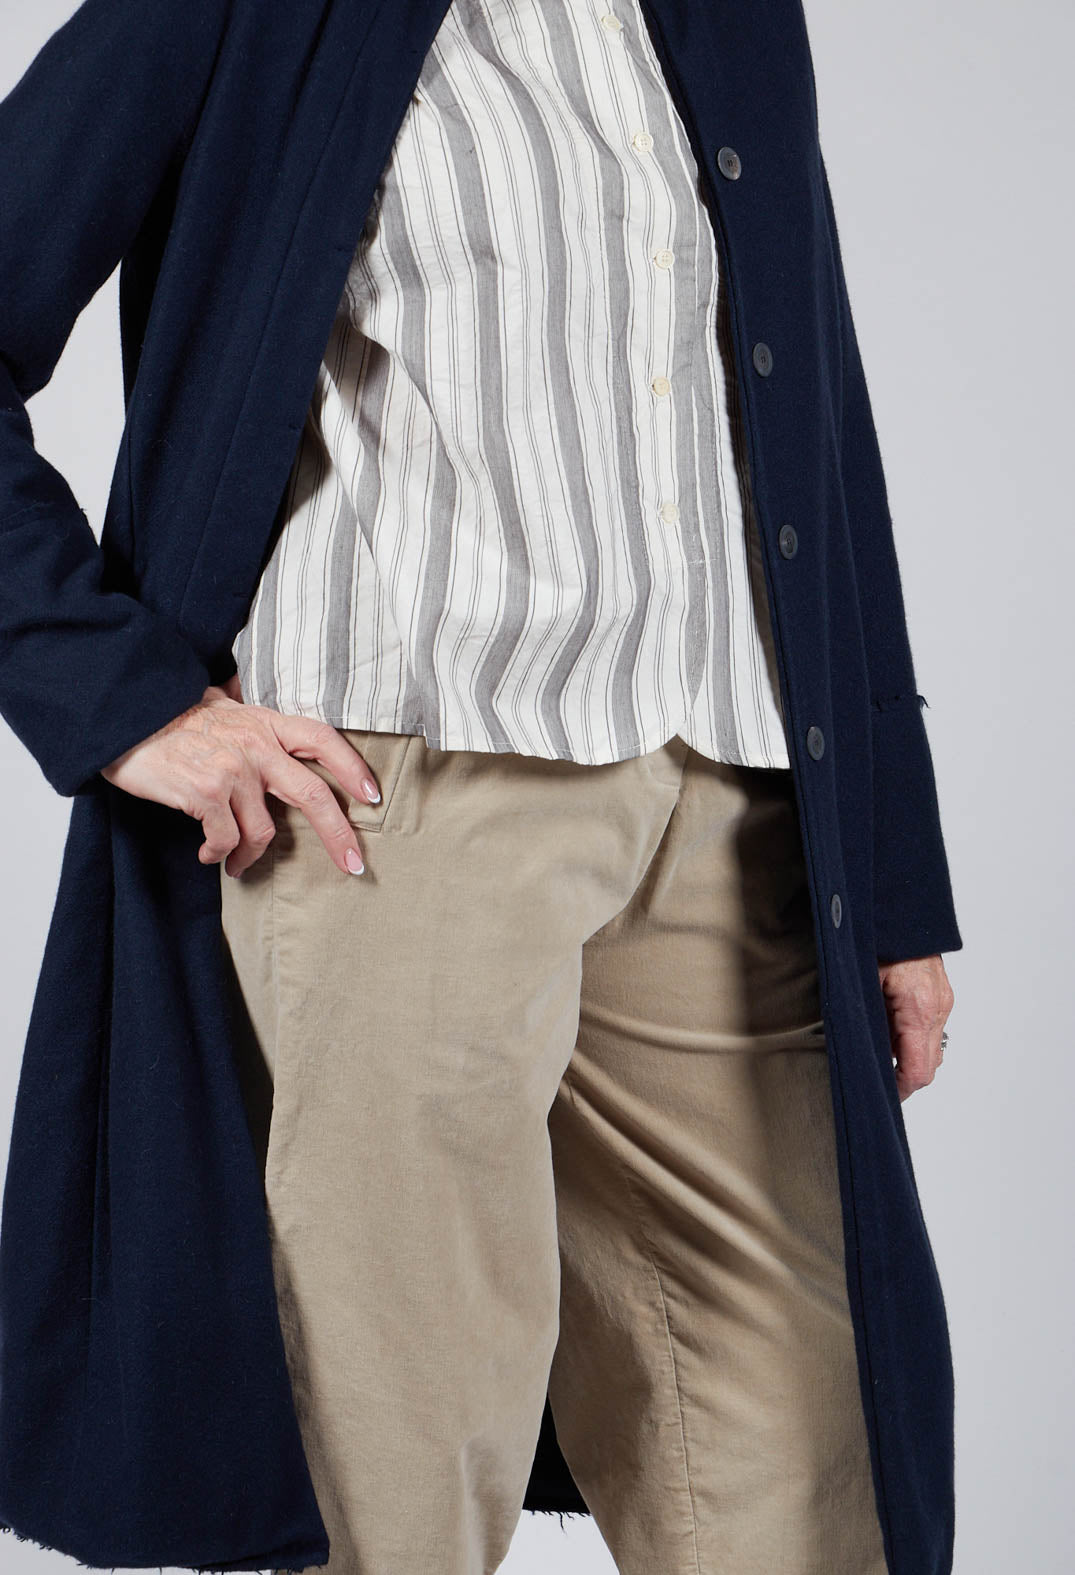 Cashmere Duster Coat in Abiss